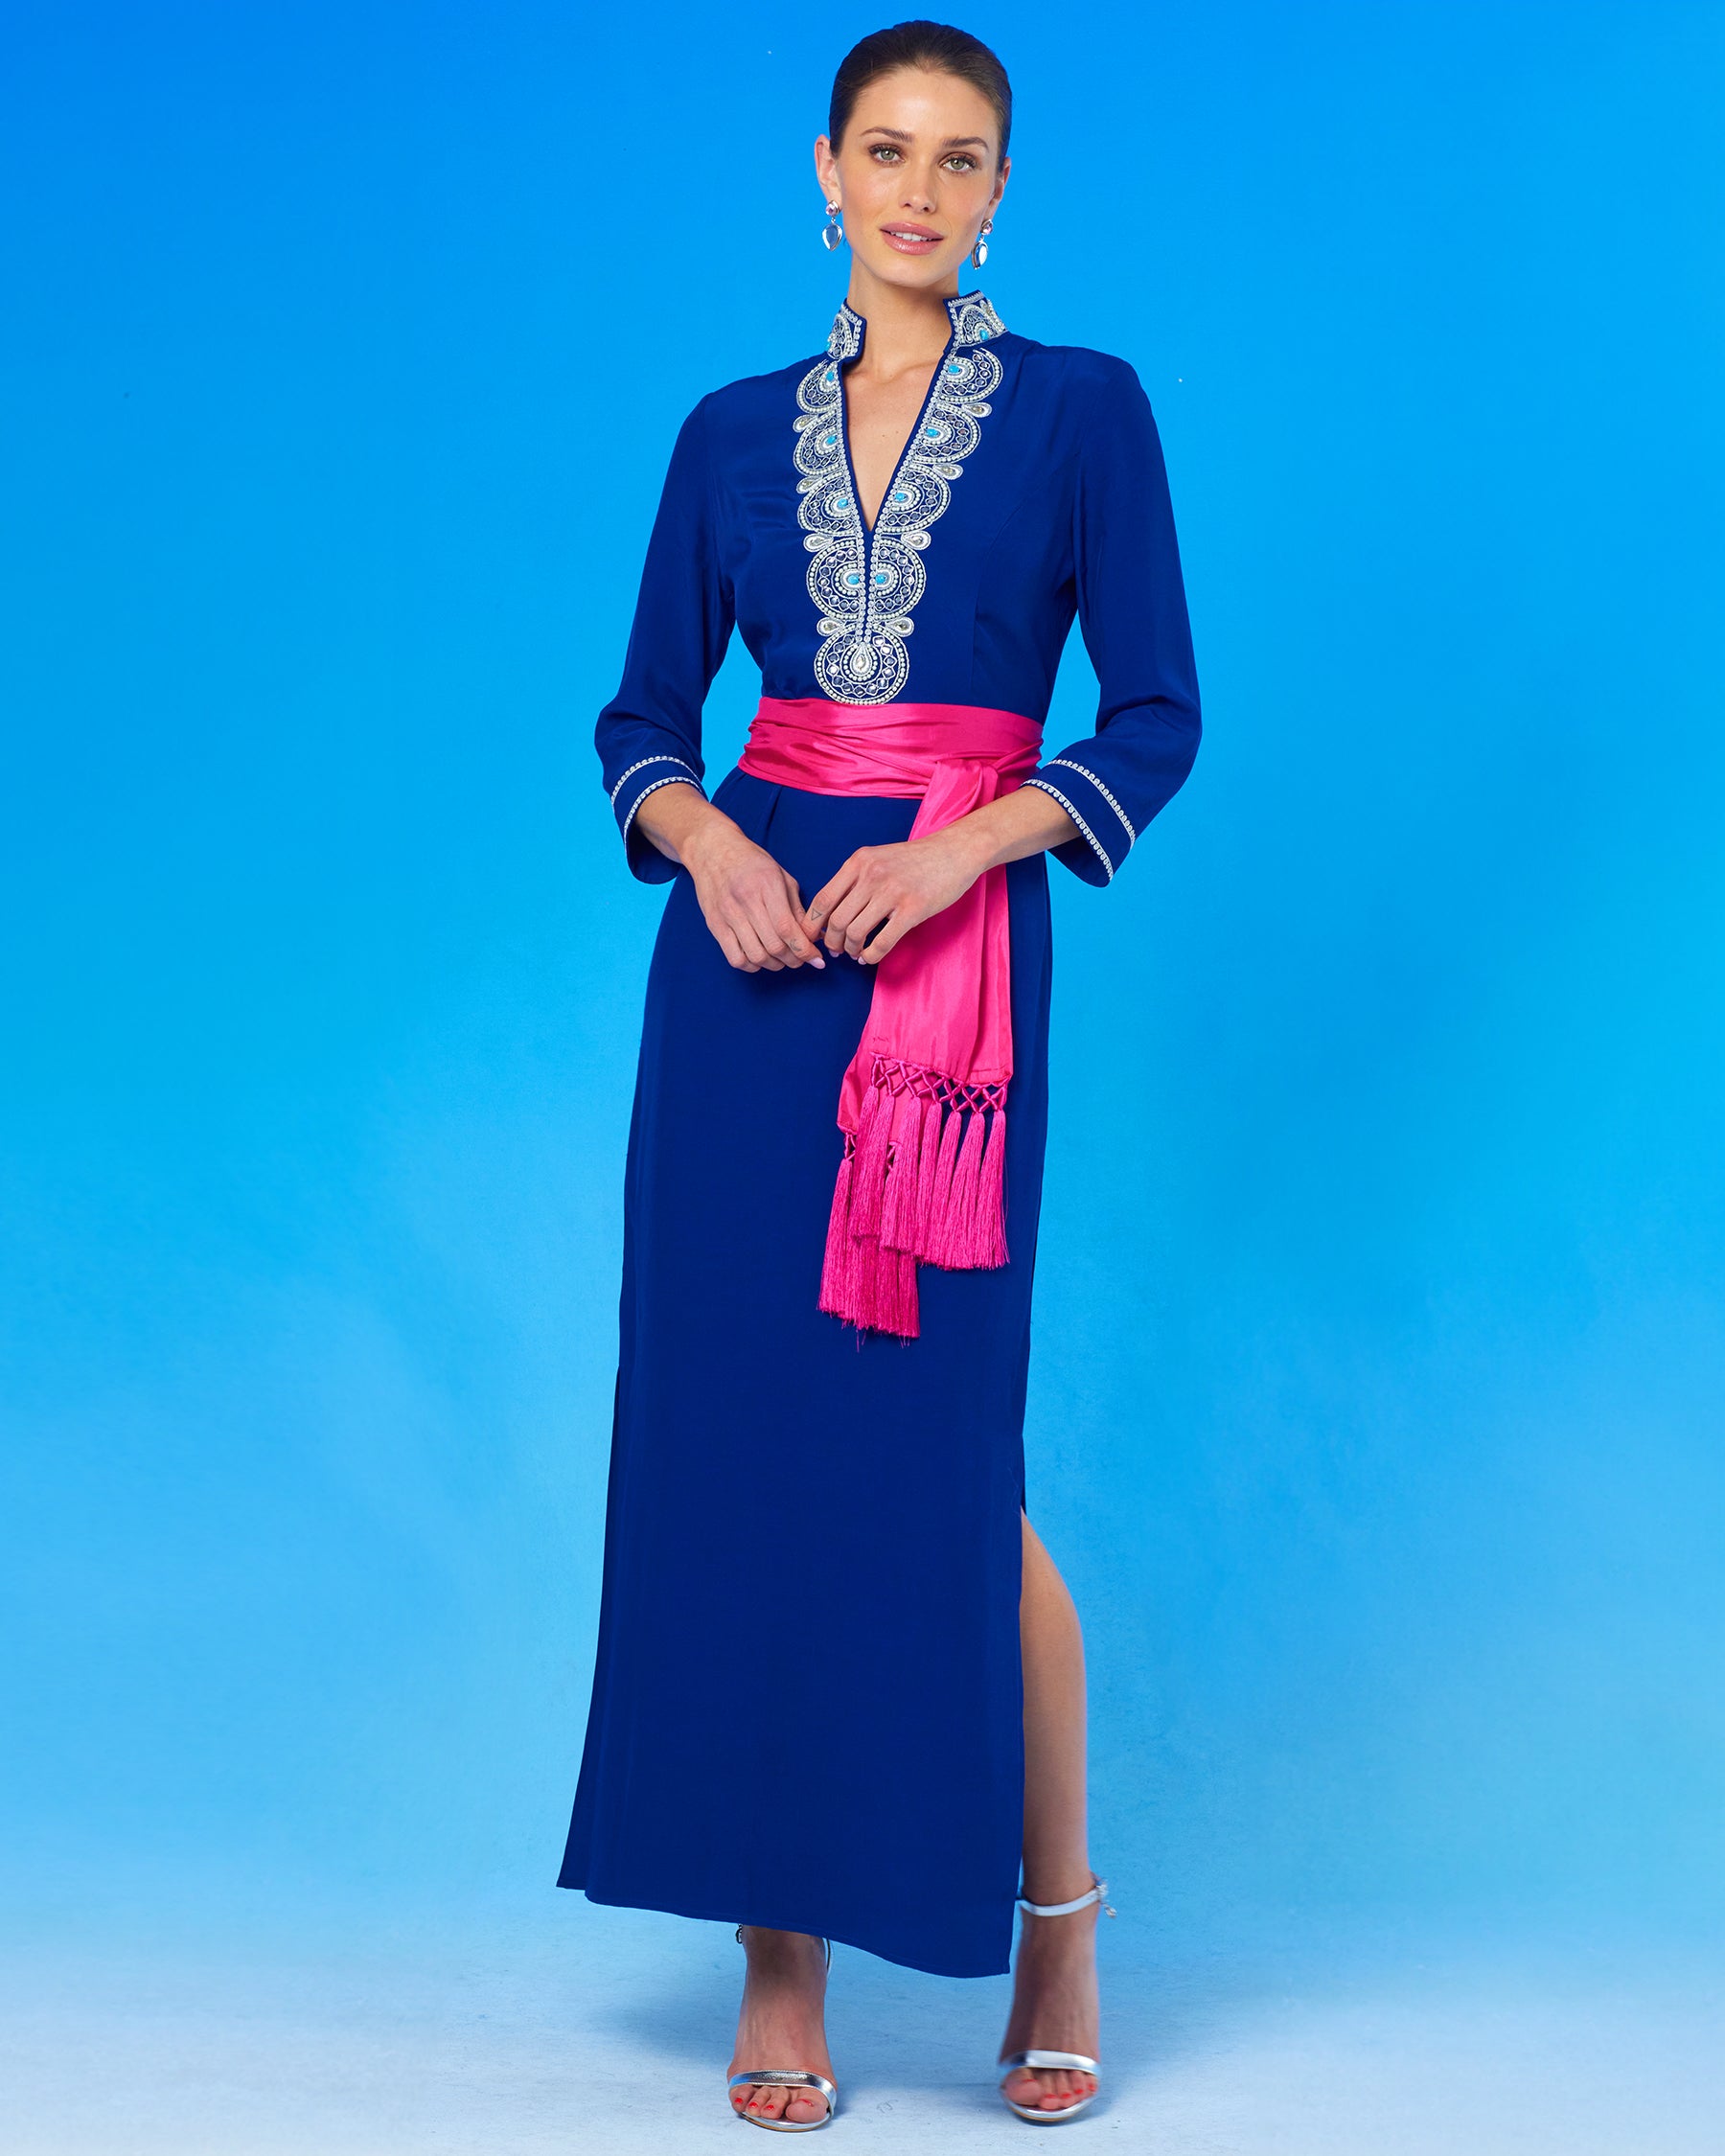 Noor Long Navy Tunic Dress with Silver Embellishment with the waist cinched with the Cosima Sash Belt in Fuchsia Hot Pink full front view;